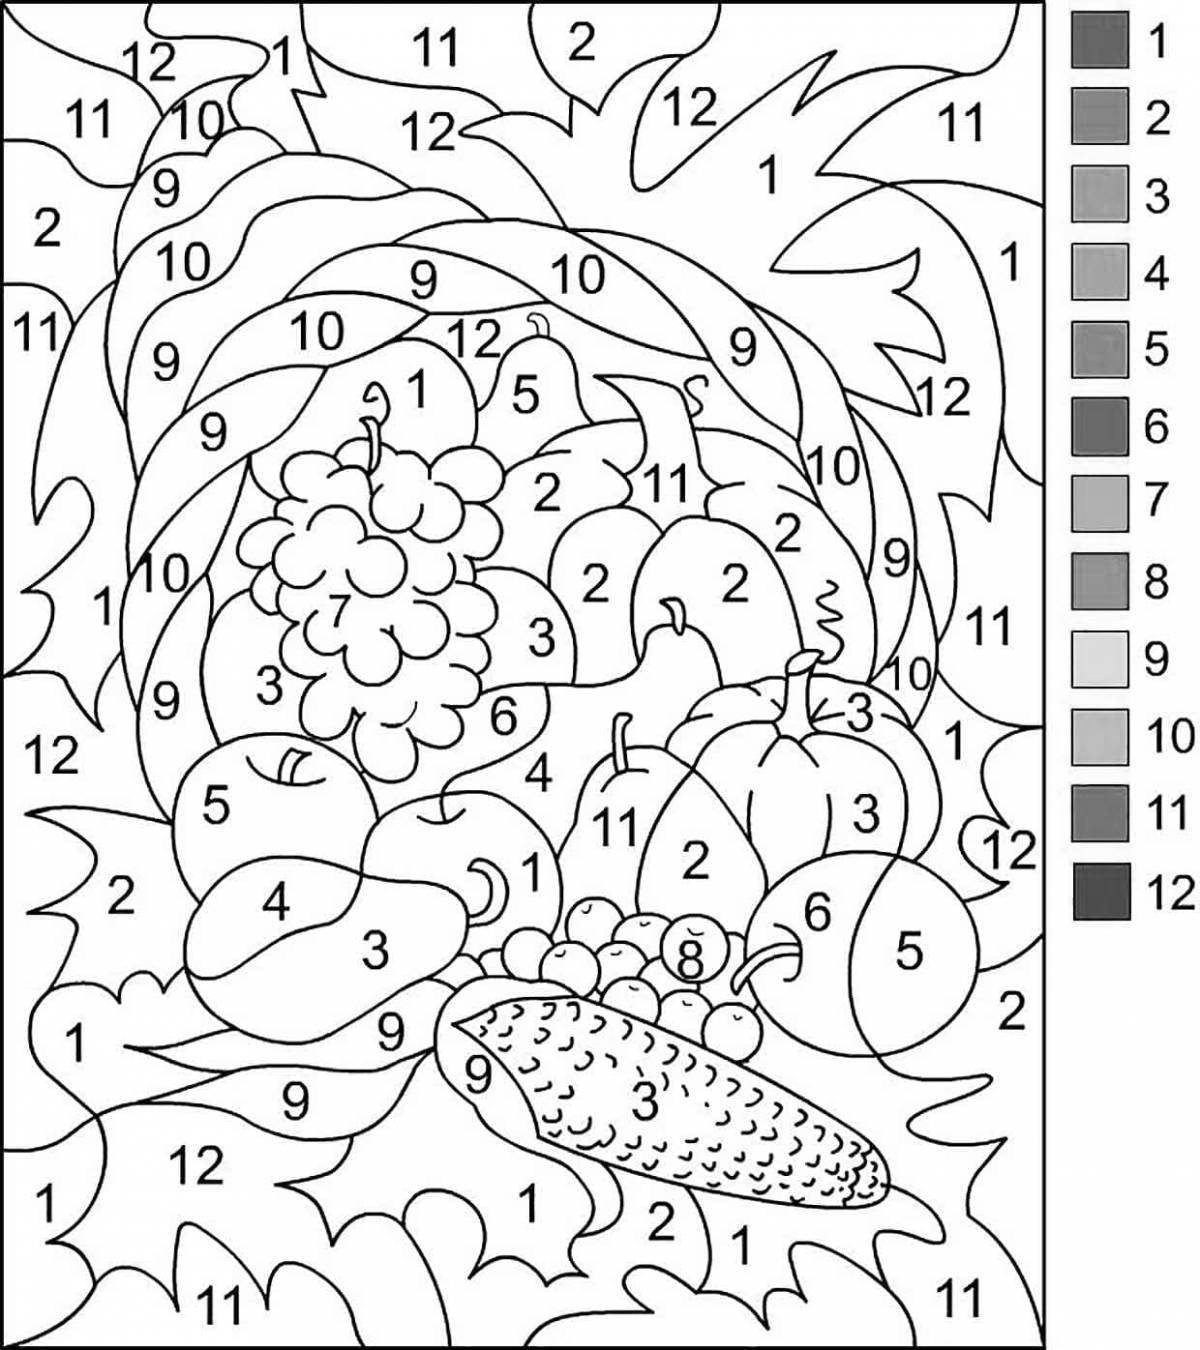 Live license plate coloring page